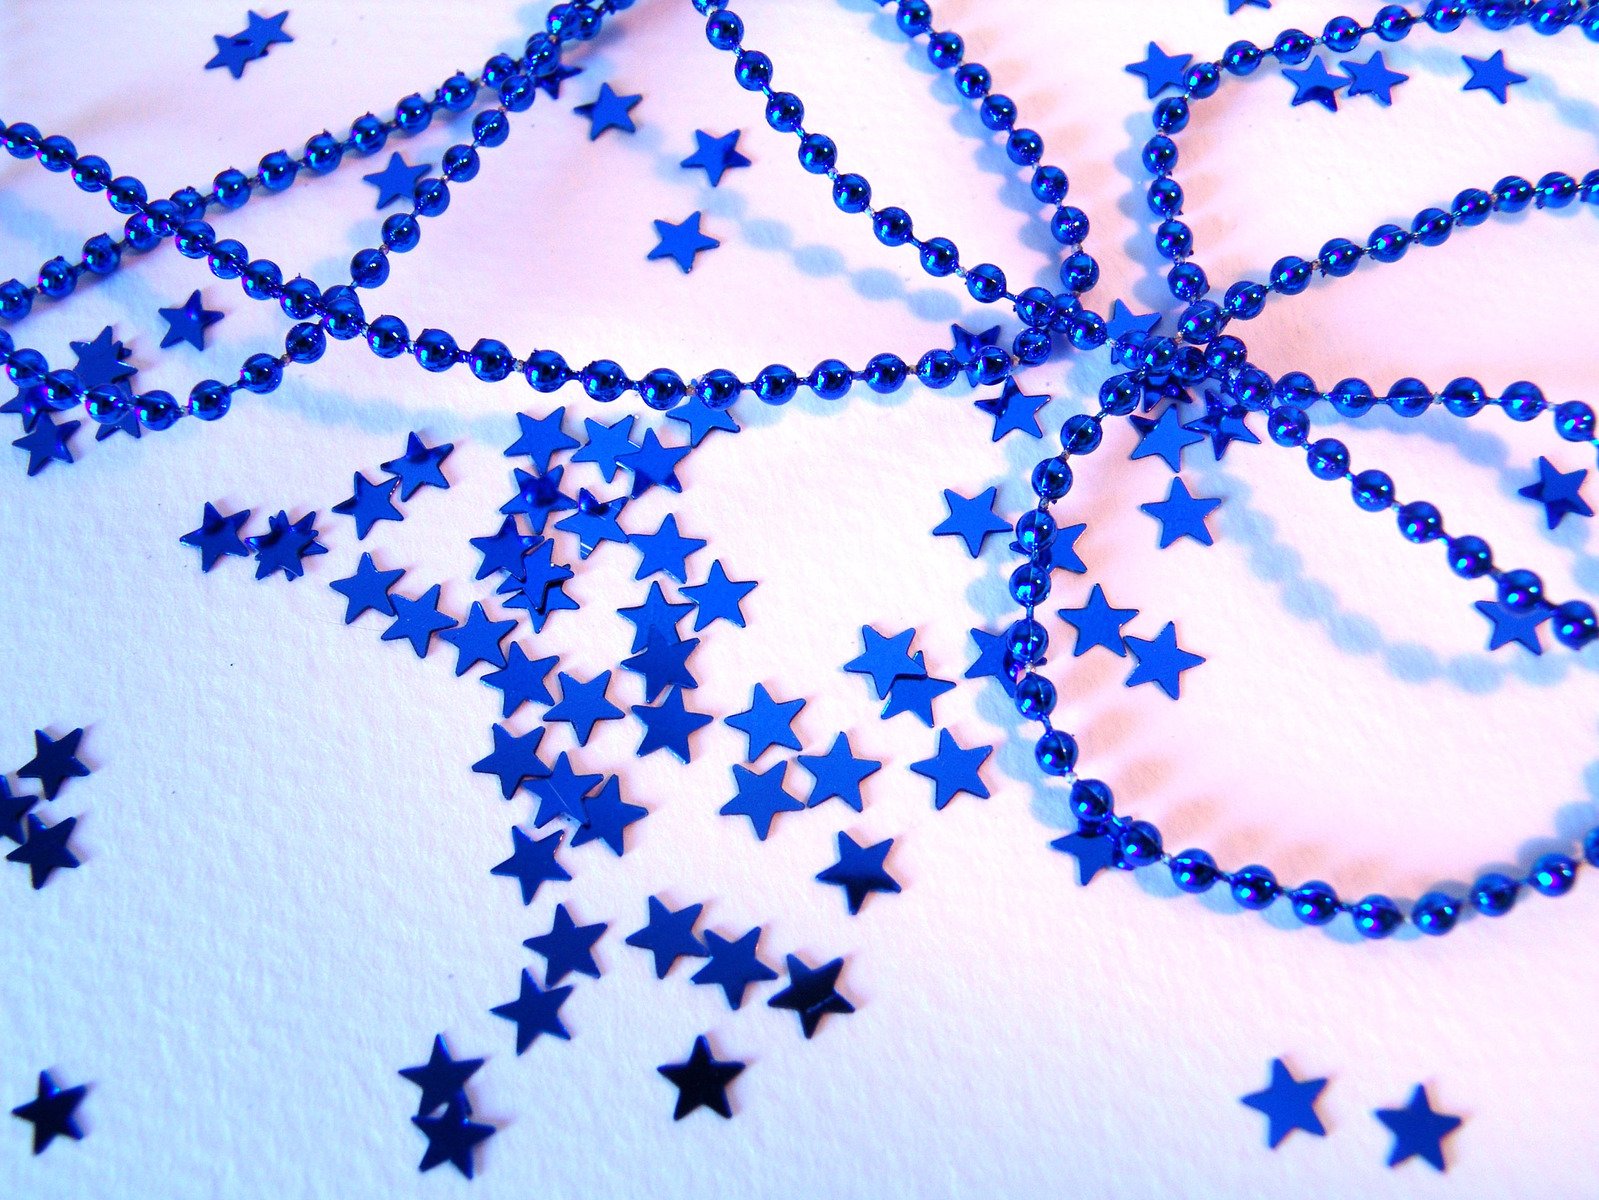 blue stars and bead necklaces are all flying together